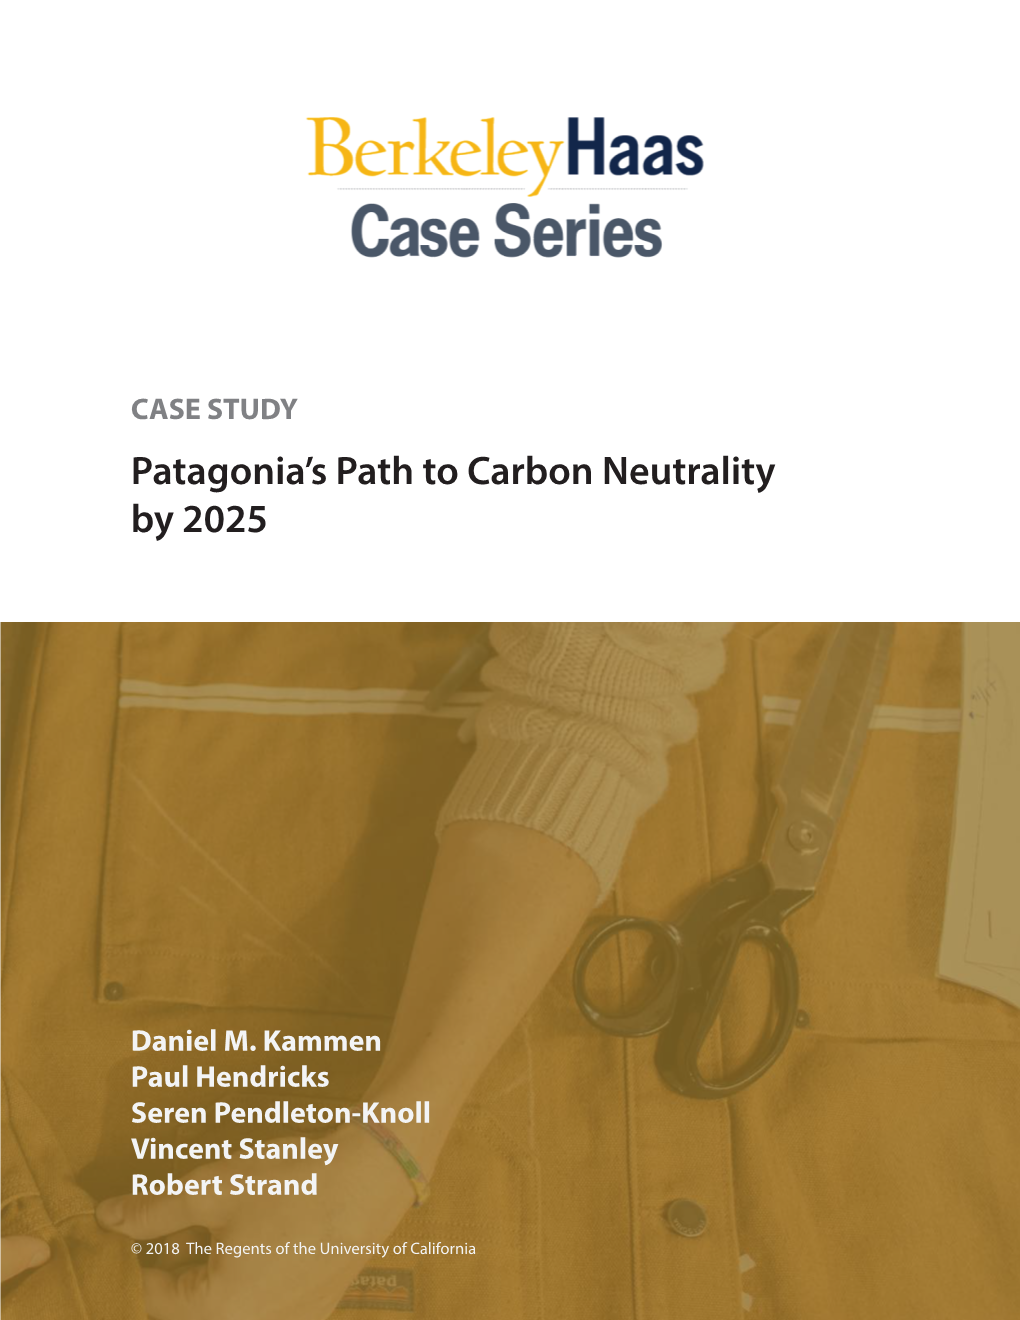 Patagonia's Path to Carbon Neutrality by 2025